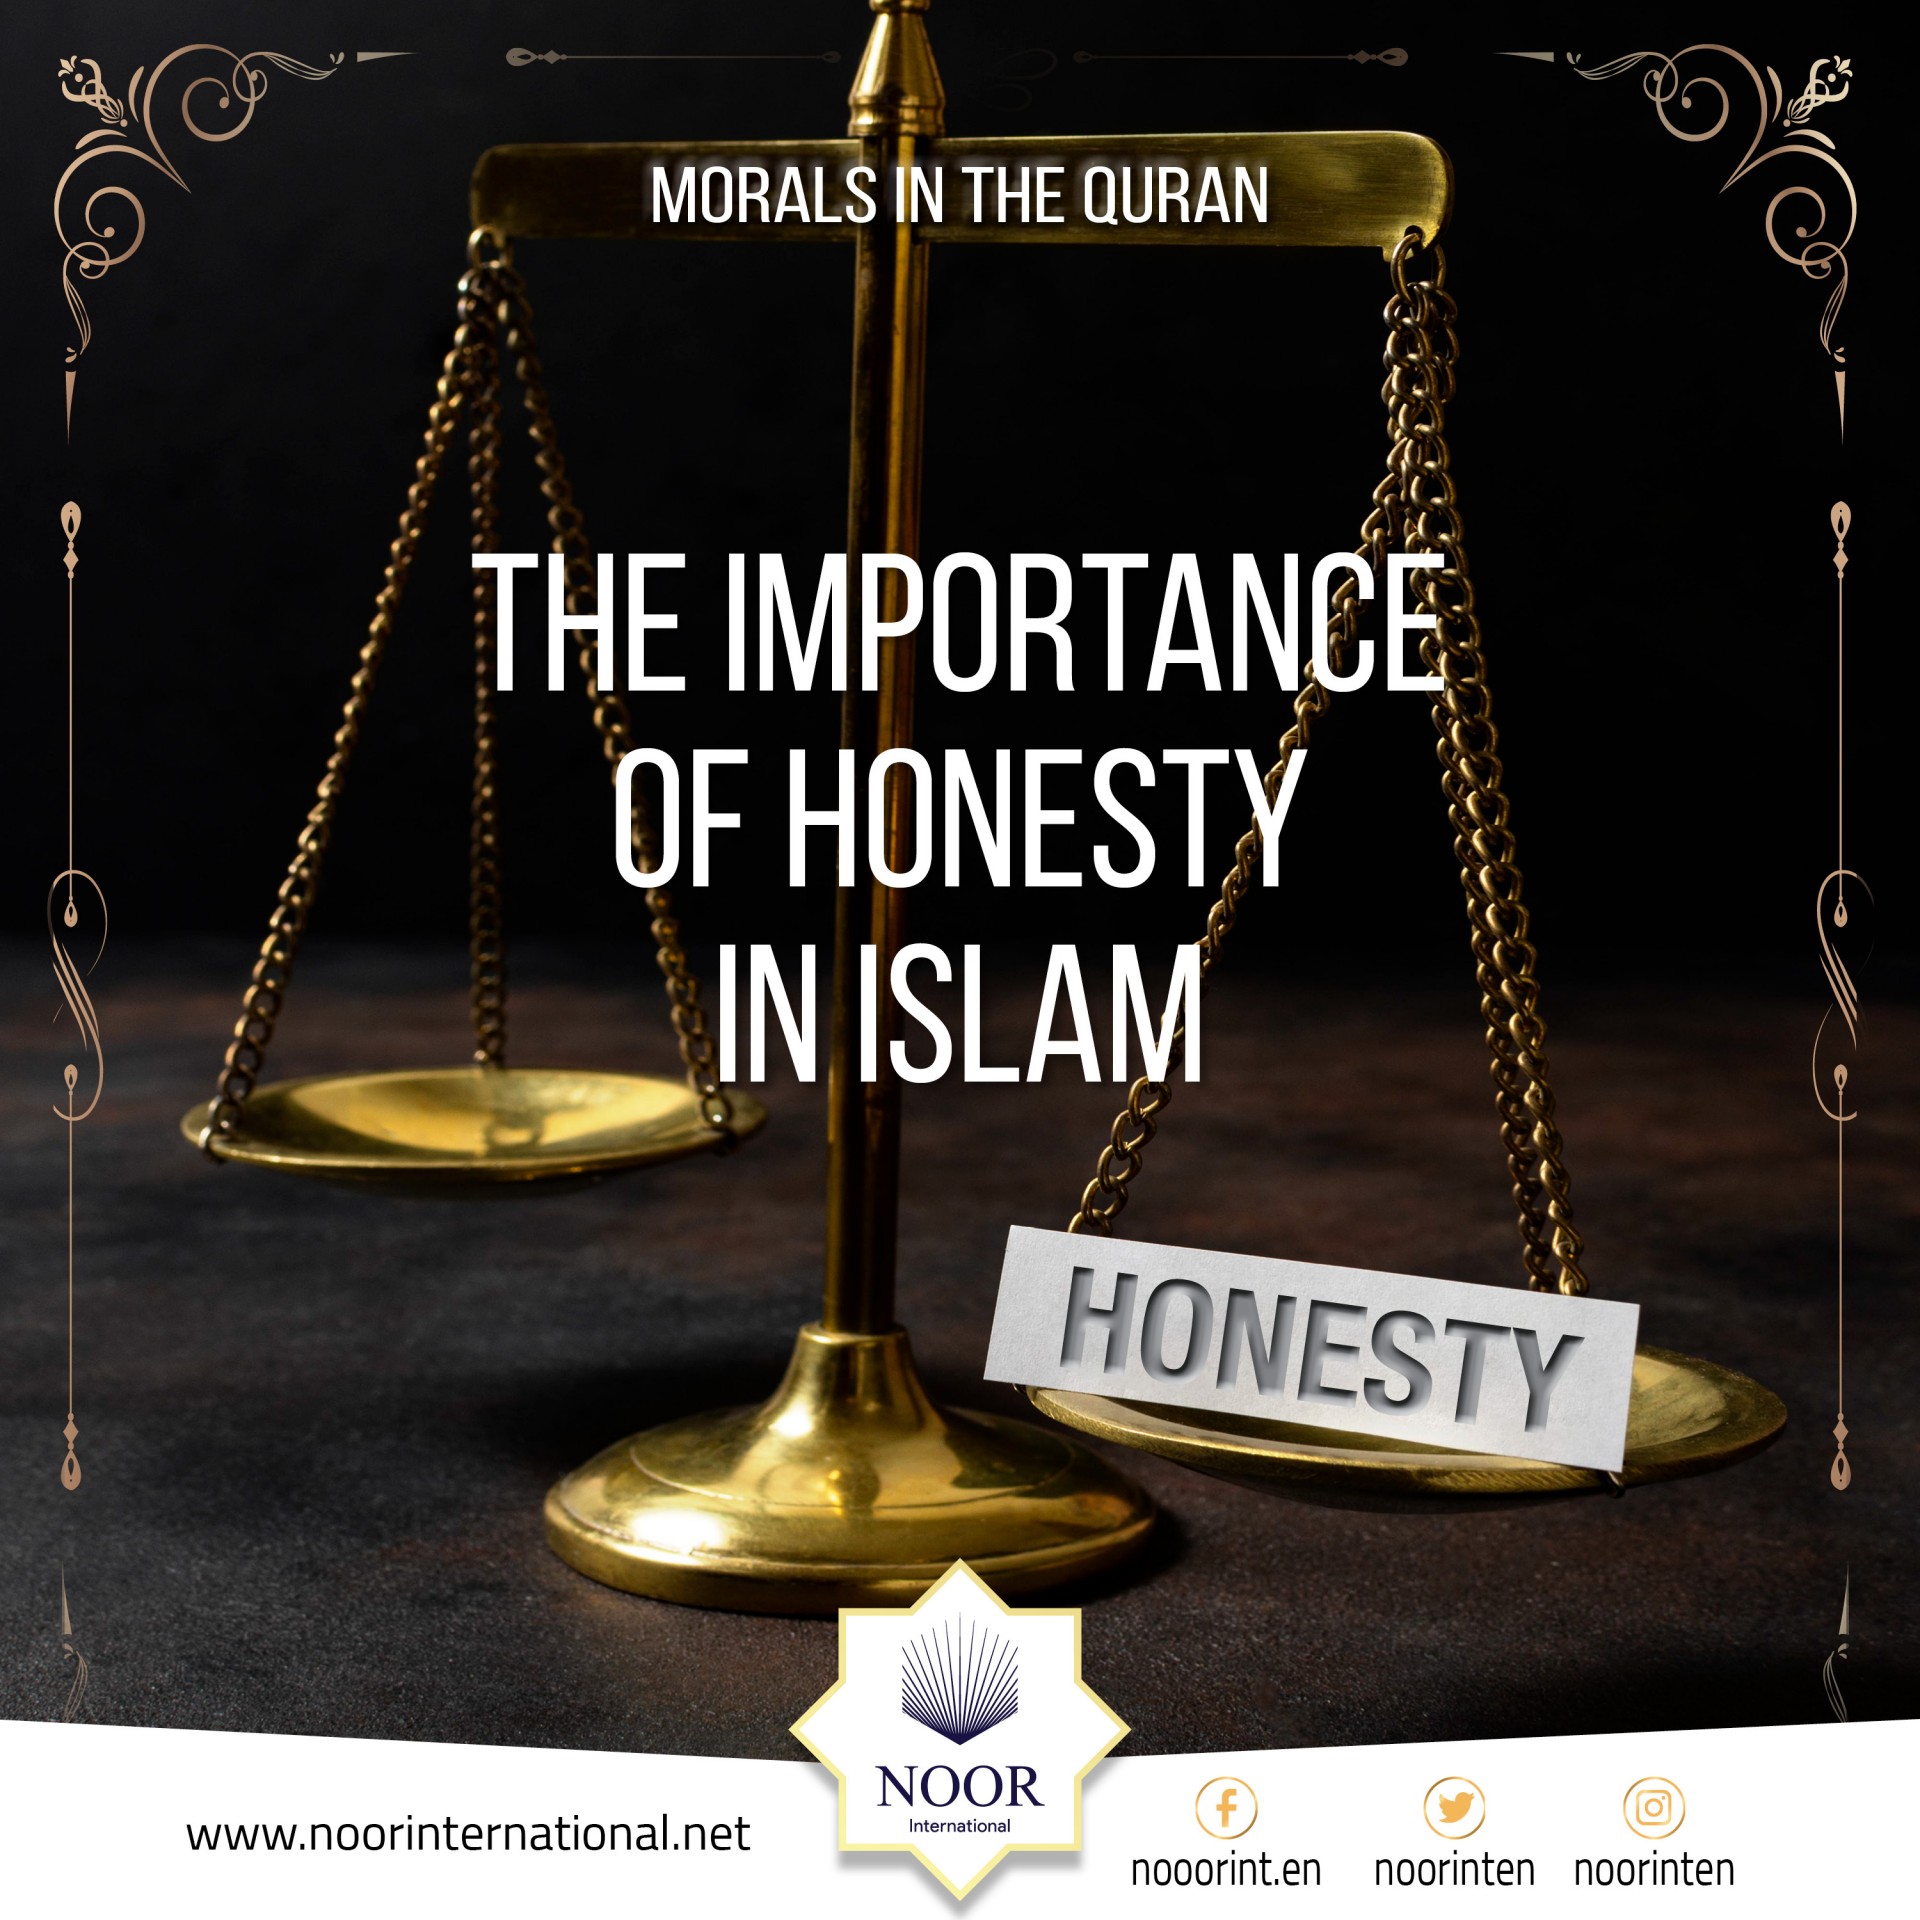 The Importance of Honesty in Islam